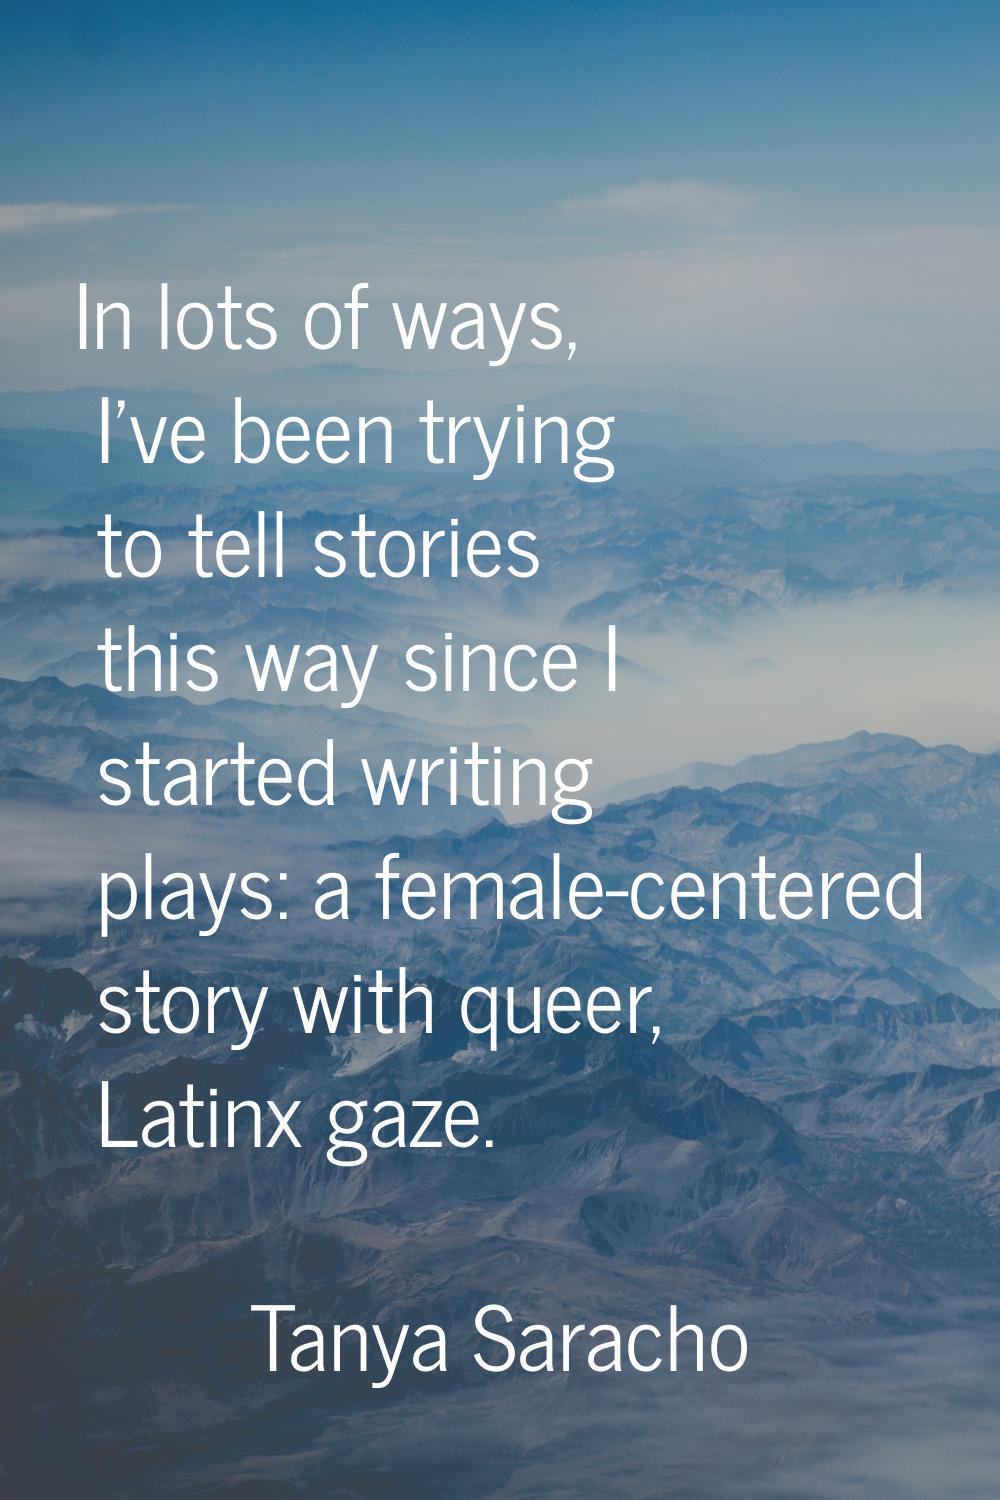 In lots of ways, I've been trying to tell stories this way since I started writing plays: a female-